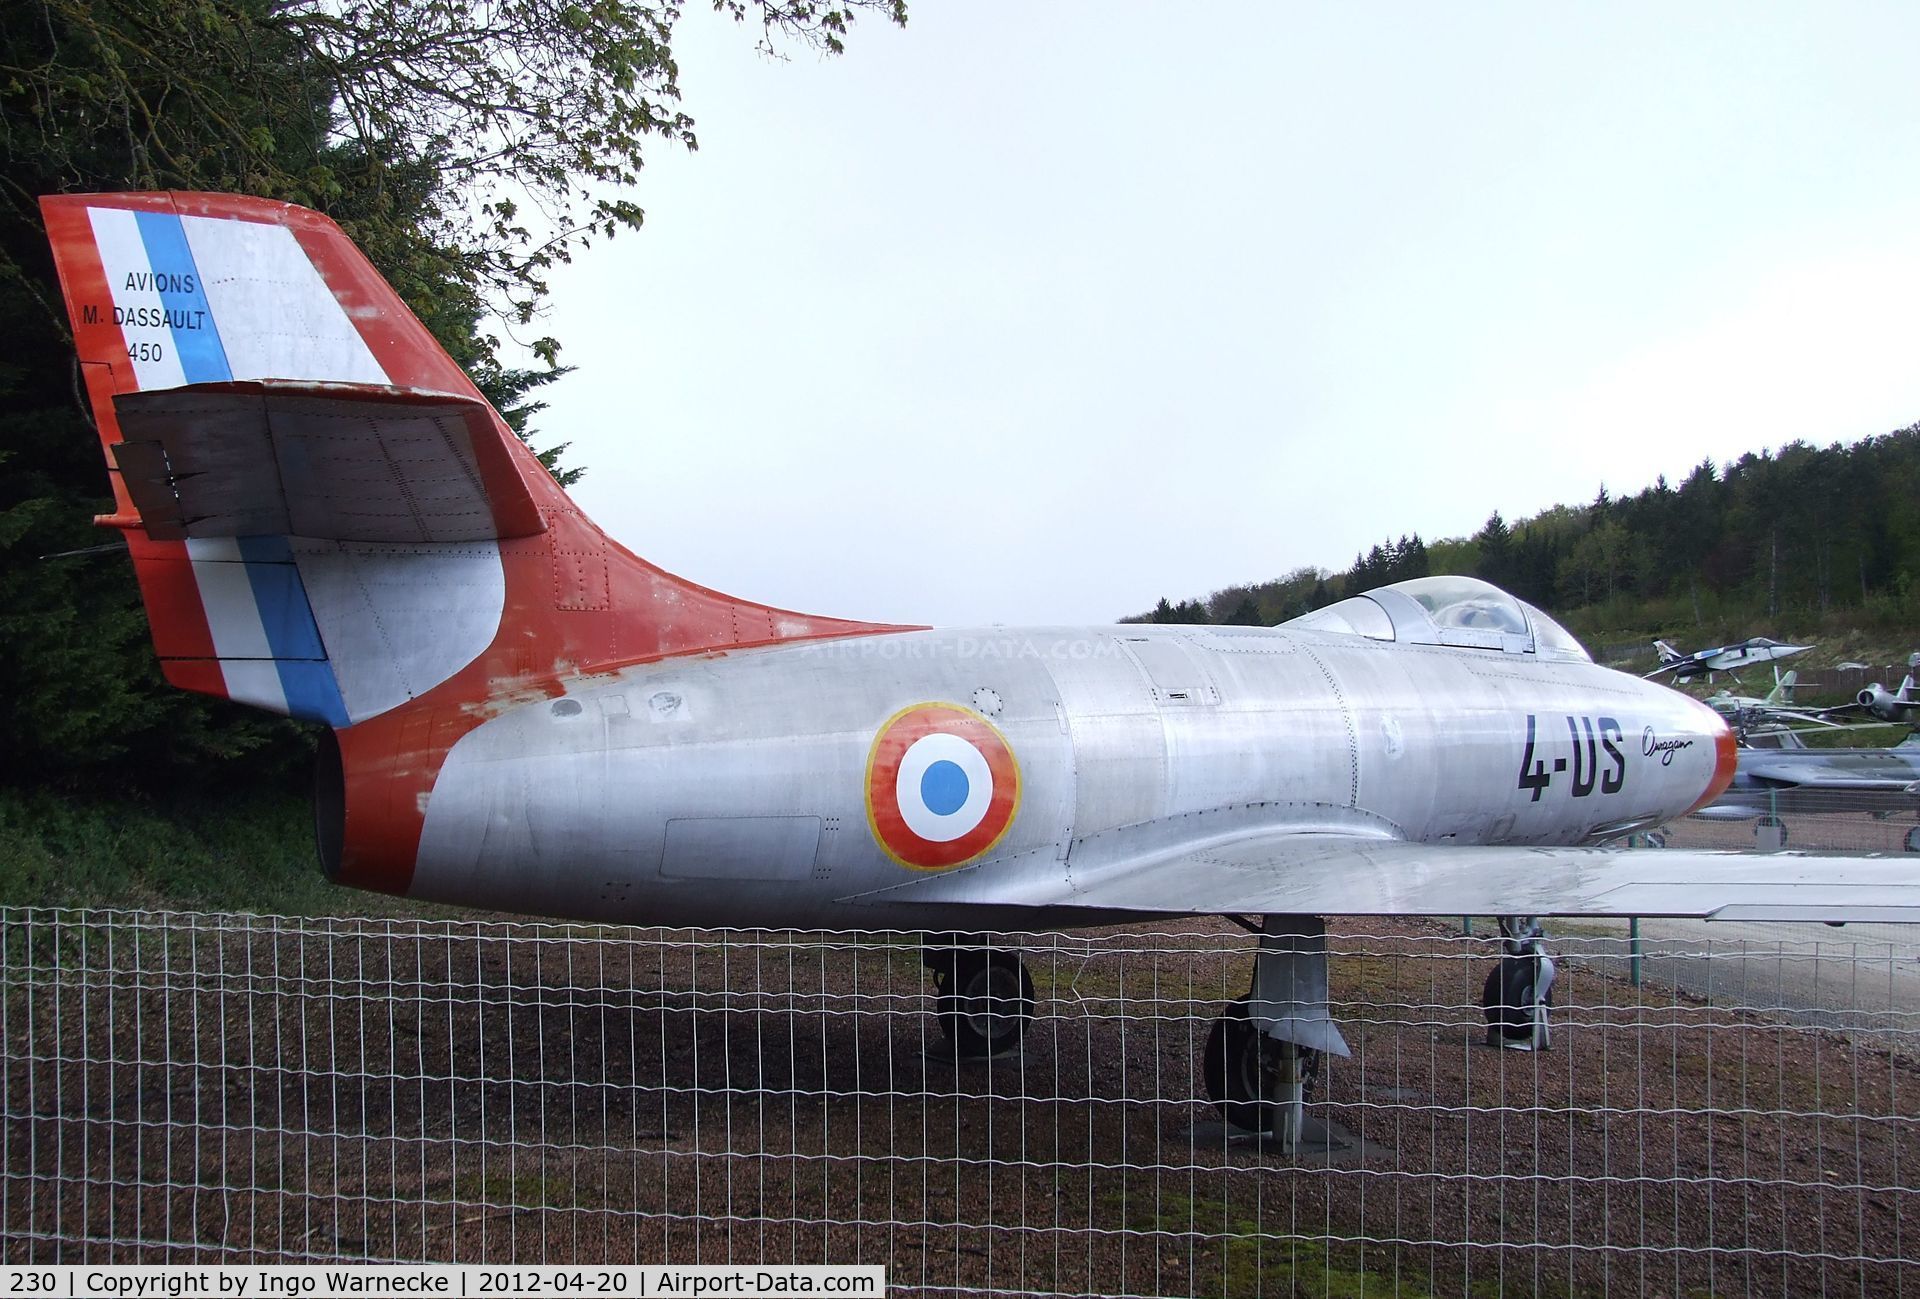 230, Dassault MD-450 Ouragan C/N 230, Dassault MD.450 Ouragan at the Musee de l'Aviation du Chateau, Savigny-les-Beaune